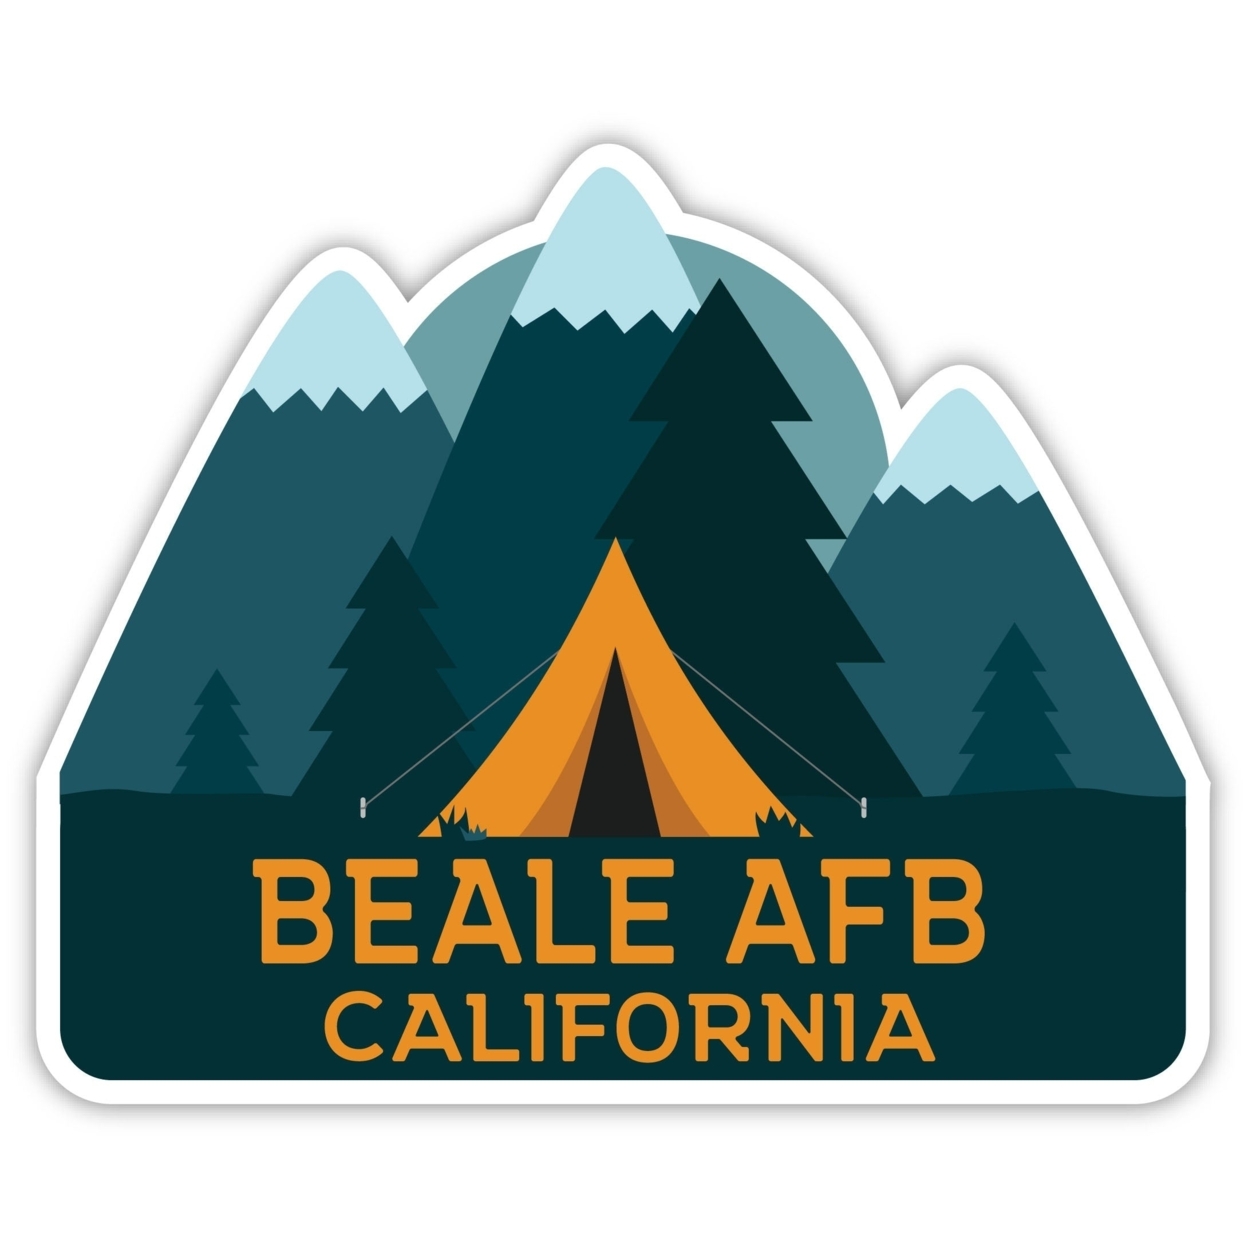 Beale AFB California Souvenir Decorative Stickers (Choose Theme And Size) - 4-Pack, 10-Inch, Tent